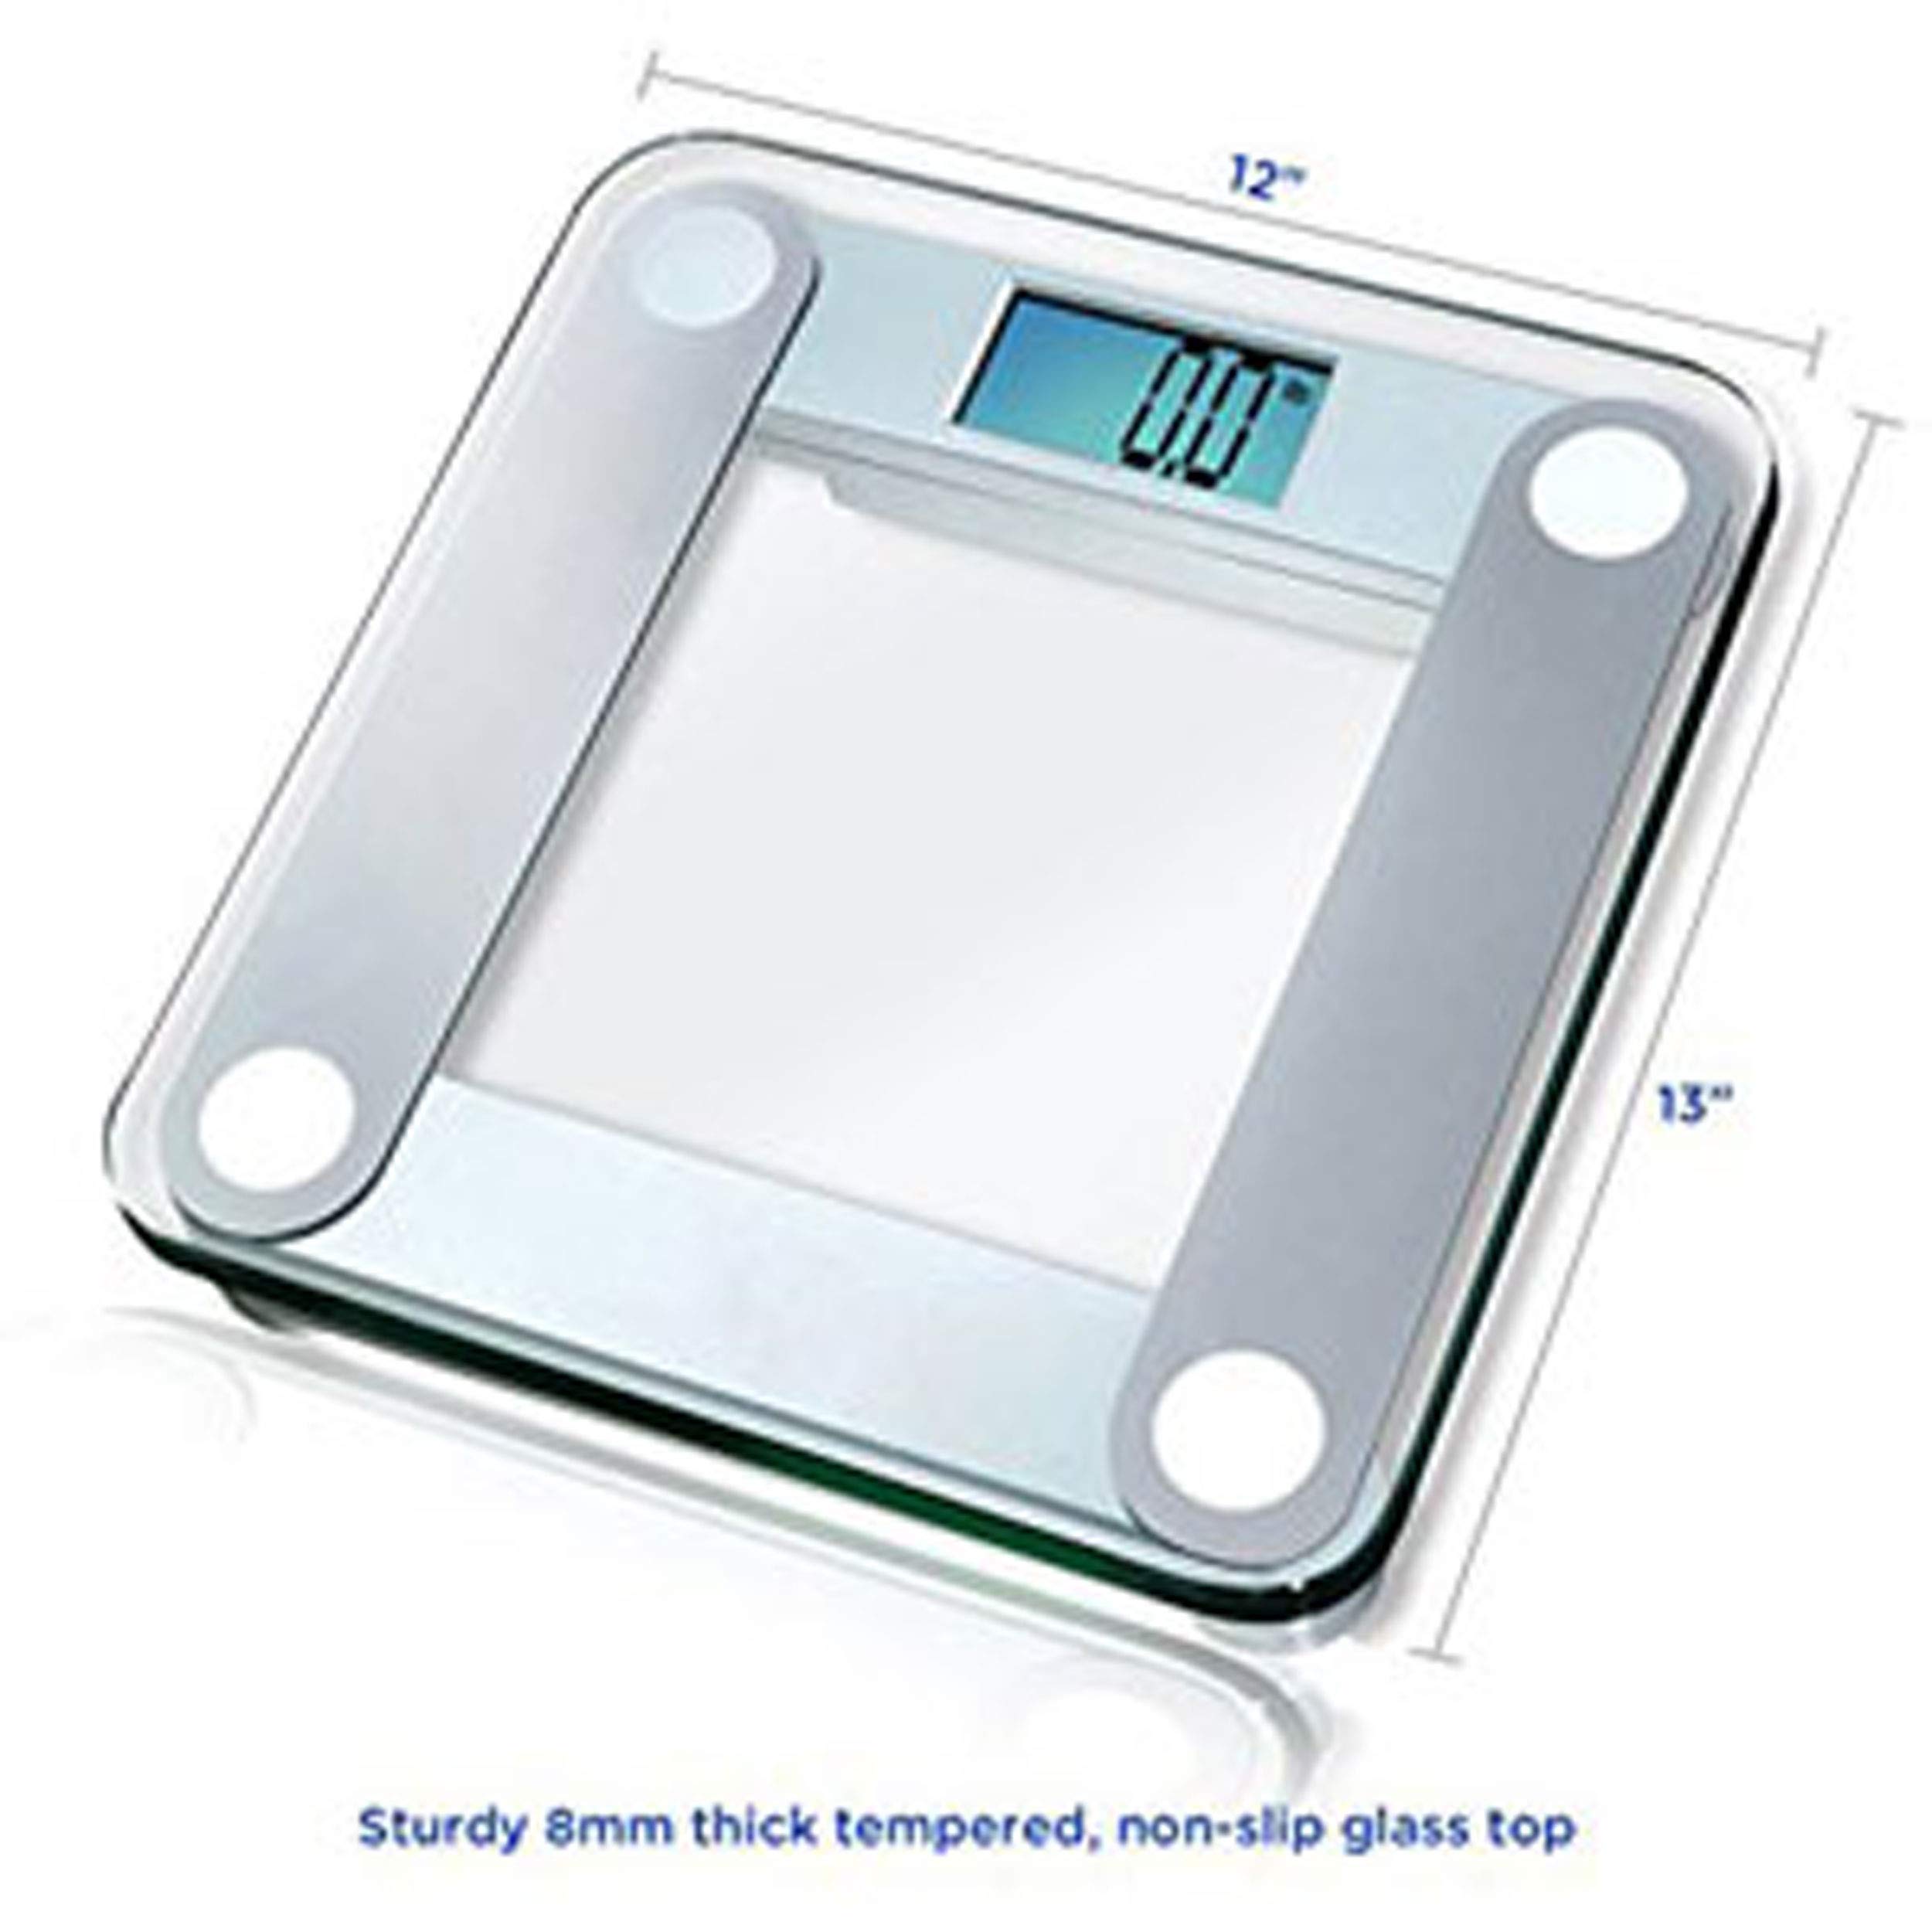 Eat Smart Products Free Body Tape Measure Included Digital Bathroom Scale with Extra Large Lighted Display, One Size, Clear